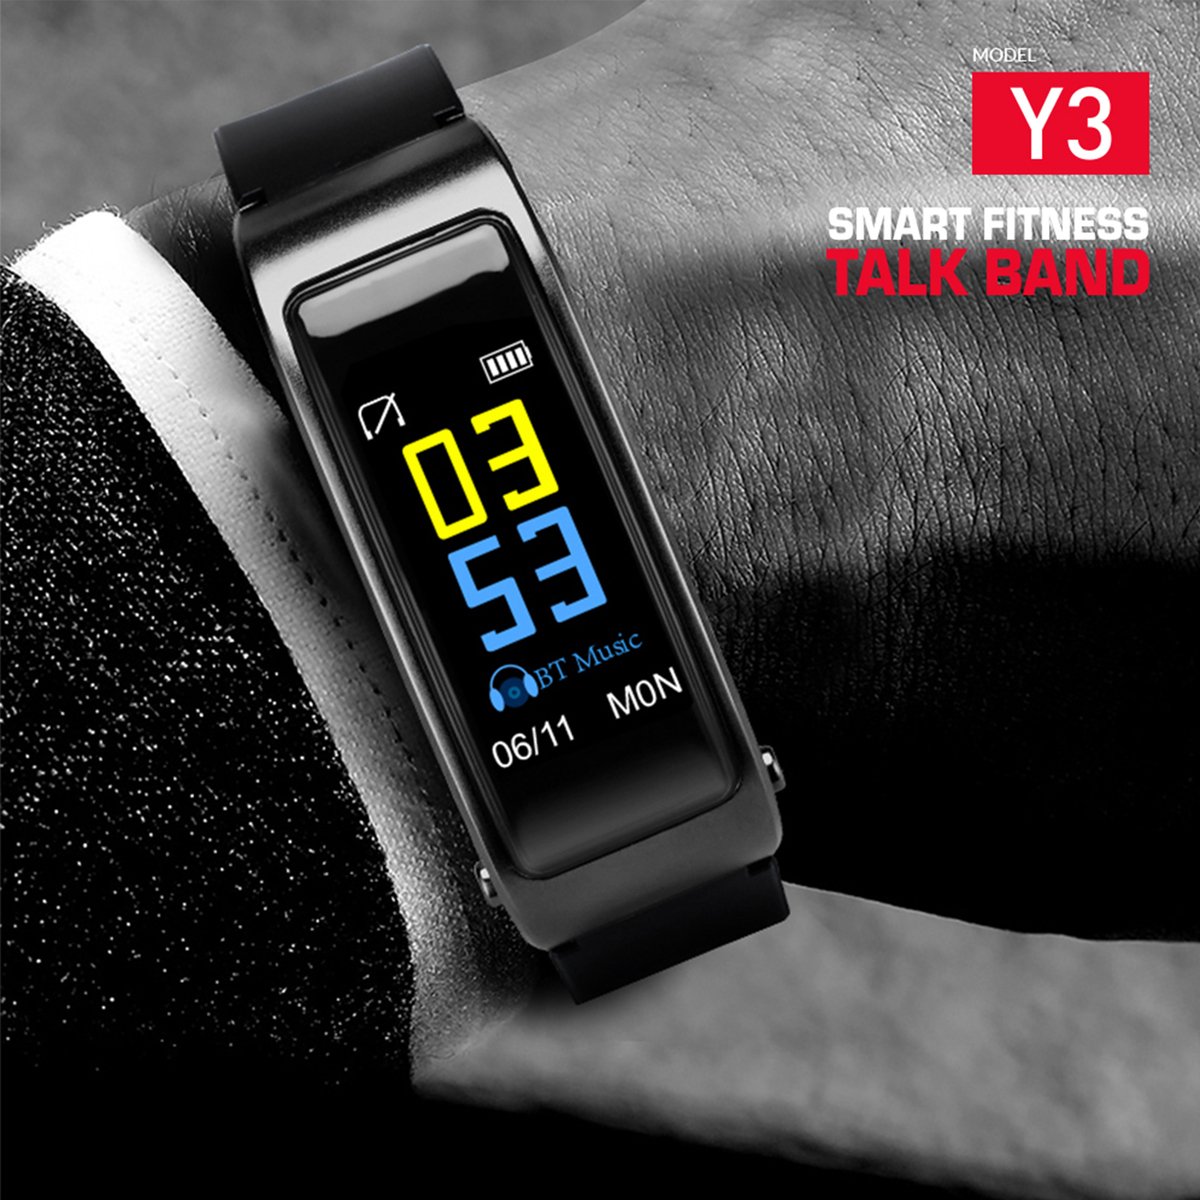 Trands Smart Fitness Talkband with Fitness Tracker Y3